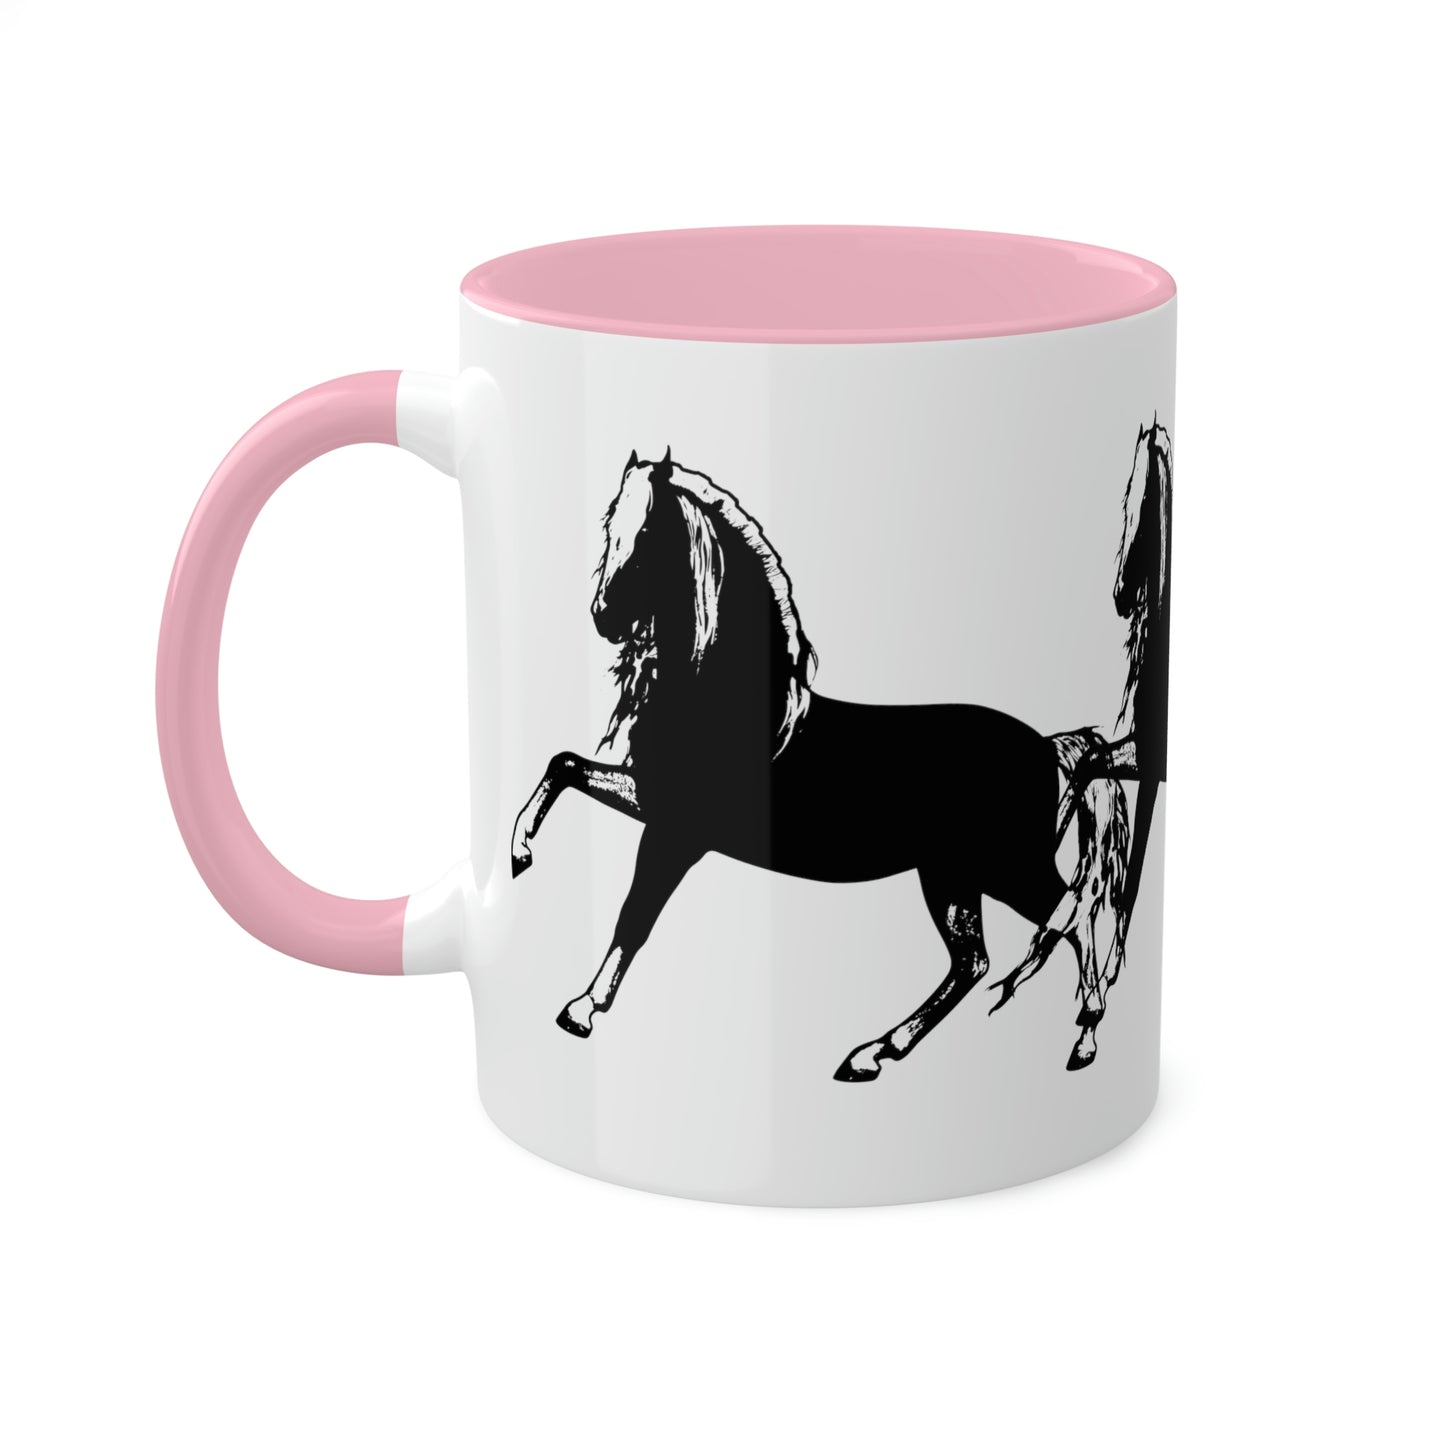 Mug Enjoy Your Morning Coffee with Our Colorful 'I Love My Horse' Mugs - Perfect for Any Horse Lover!